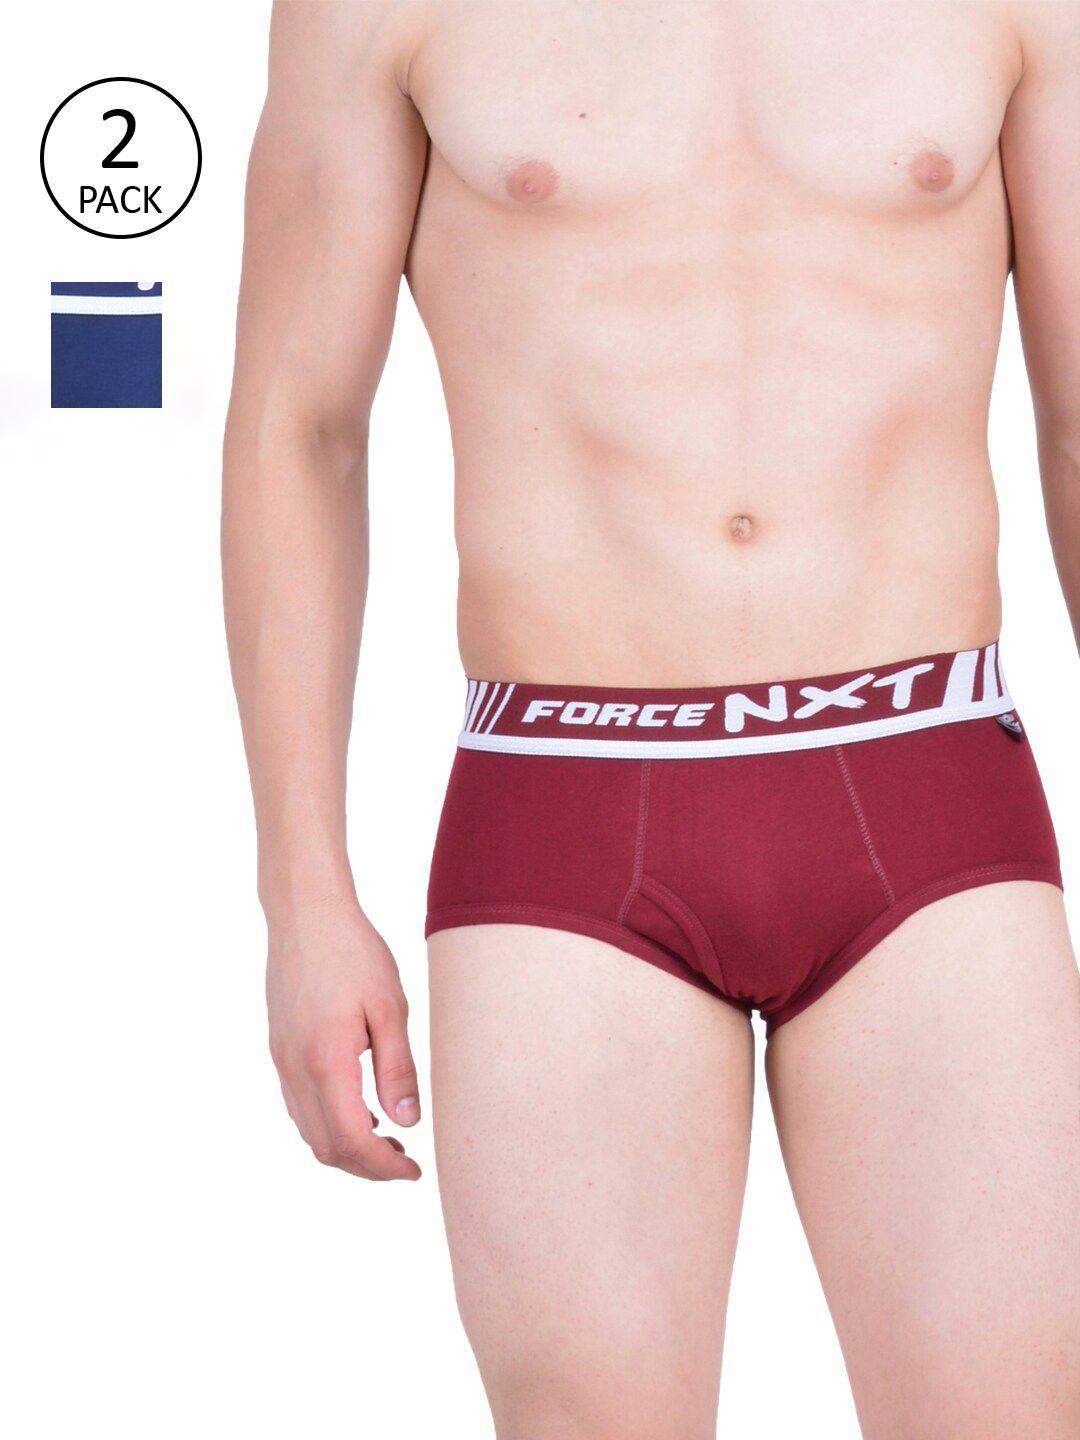 force nxt men pack of 2 assorted basic briefs mnfr-201-po2